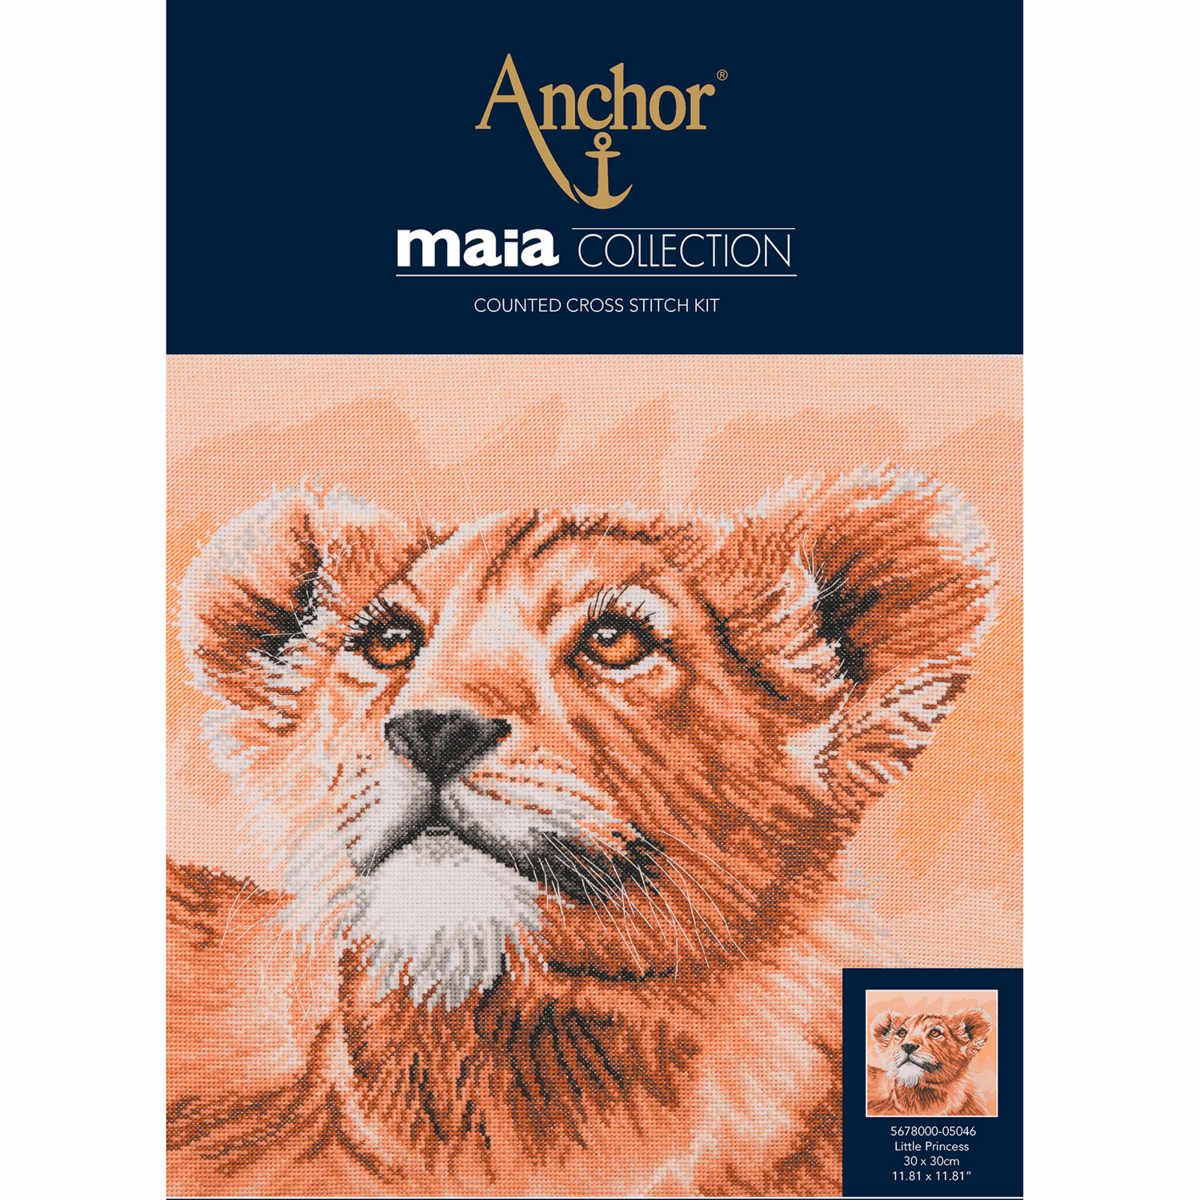 Image showing Anchor Maia cross-stitch kit